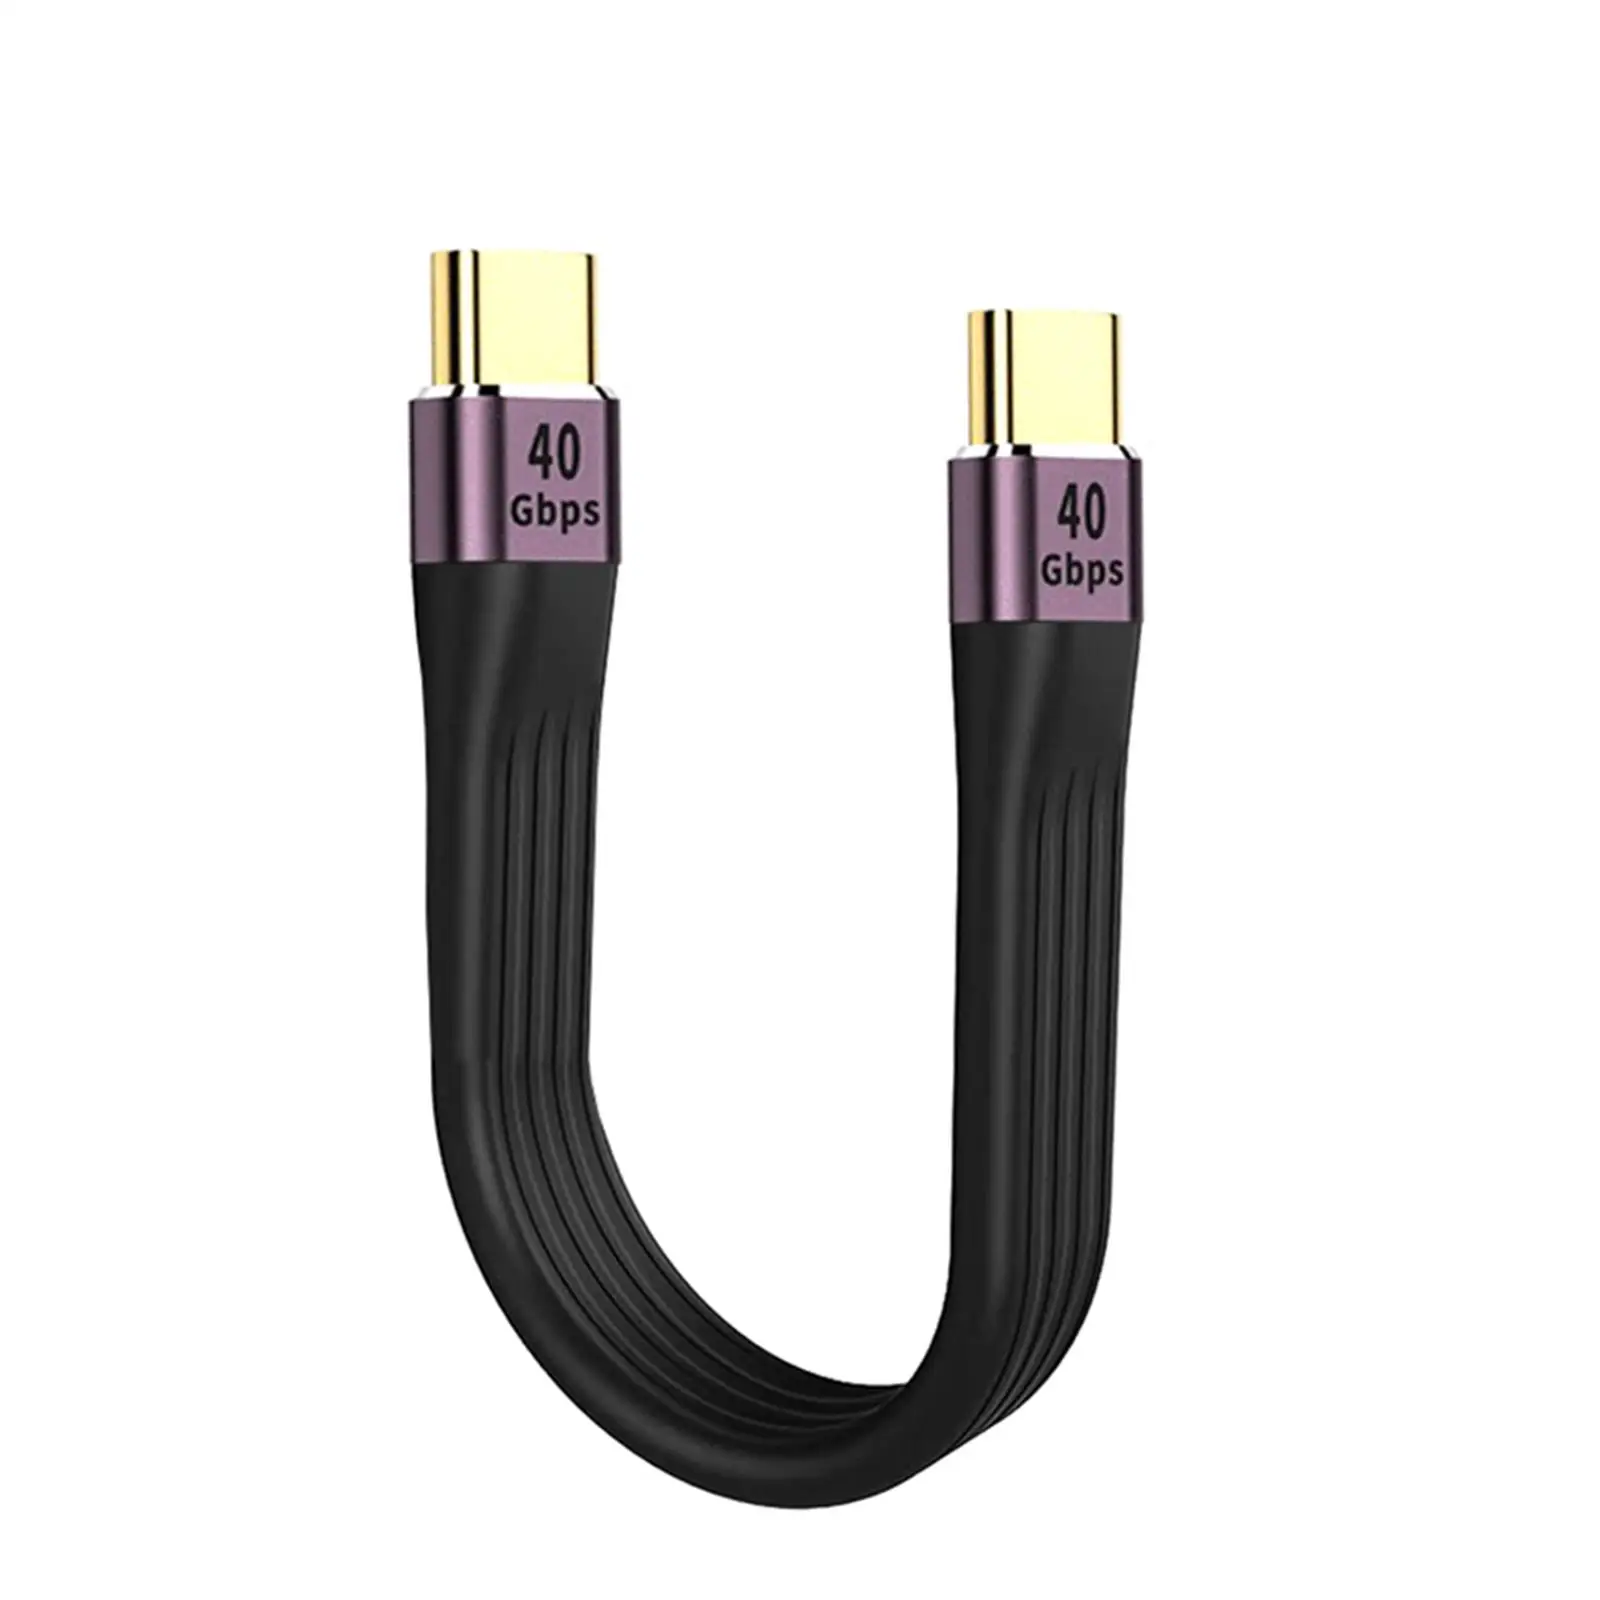 Short USB C Cable 100W 40Gbps Data Transfer data Fpc Design for 4/3 External SSD Phone